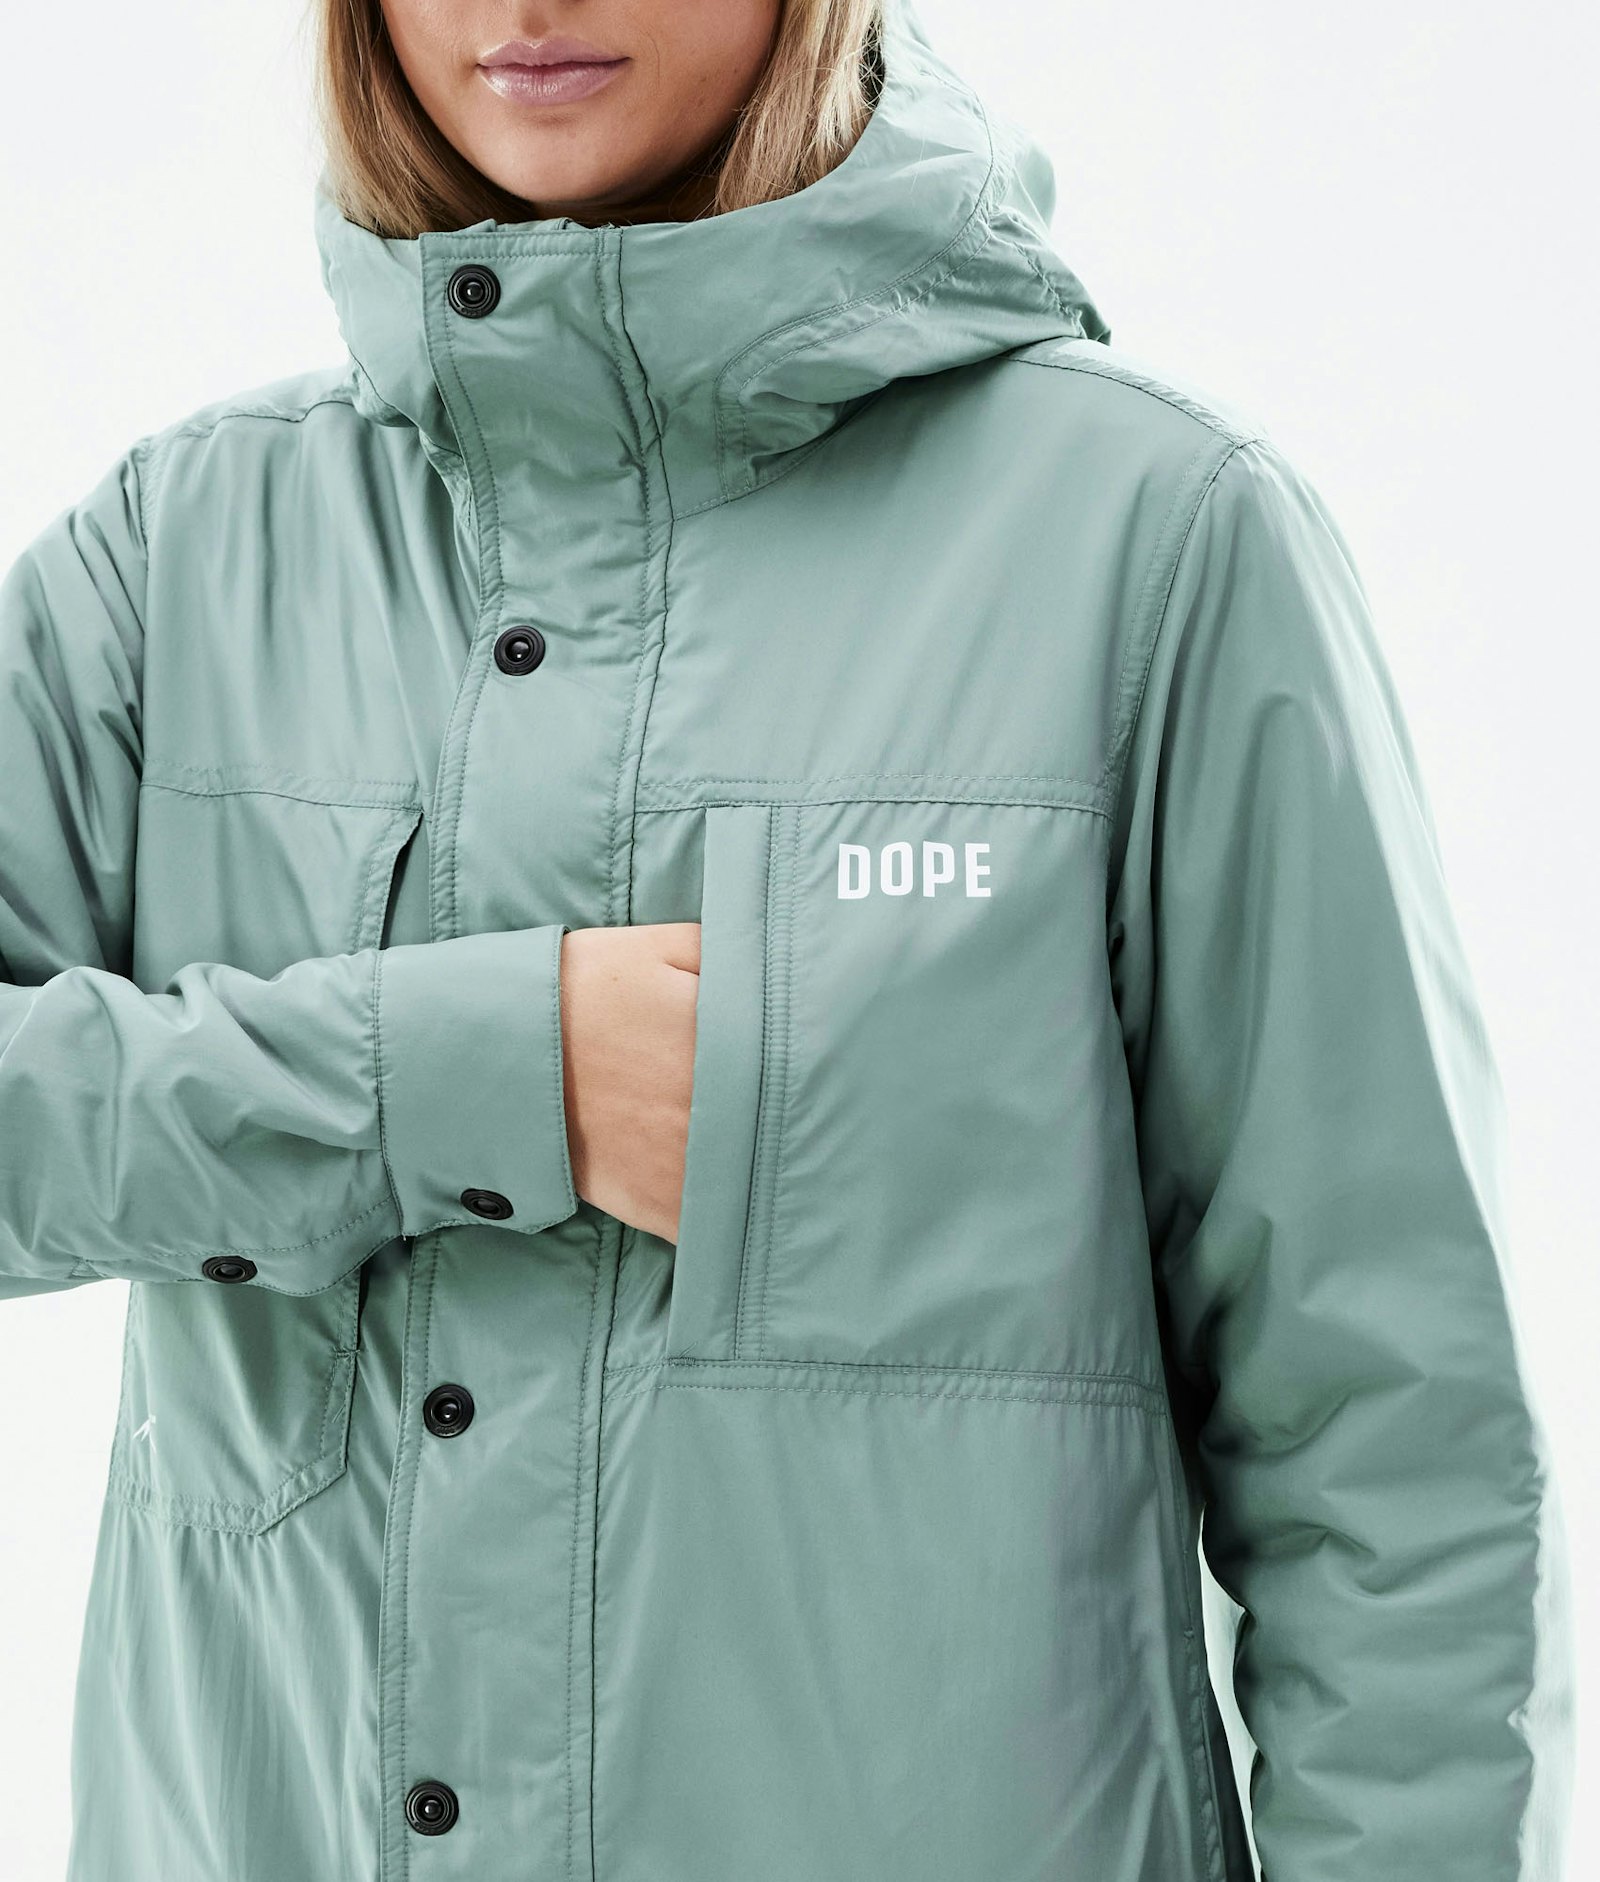 Insulated W Veste Outdoor - Couche intermédiaire Femme Faded Green